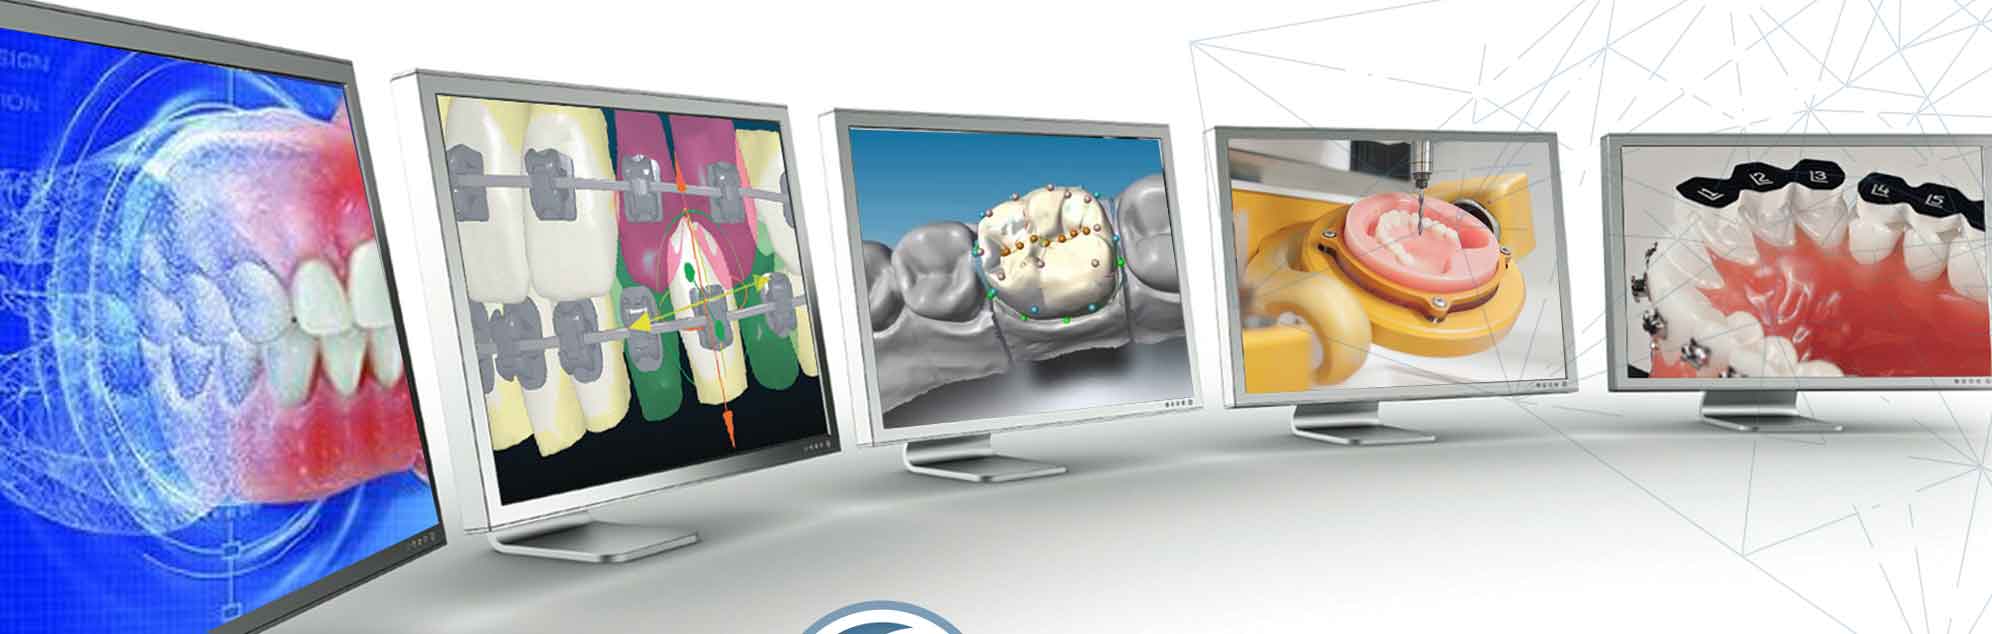 The Benefits of Having an On-site Digital Dental Lab